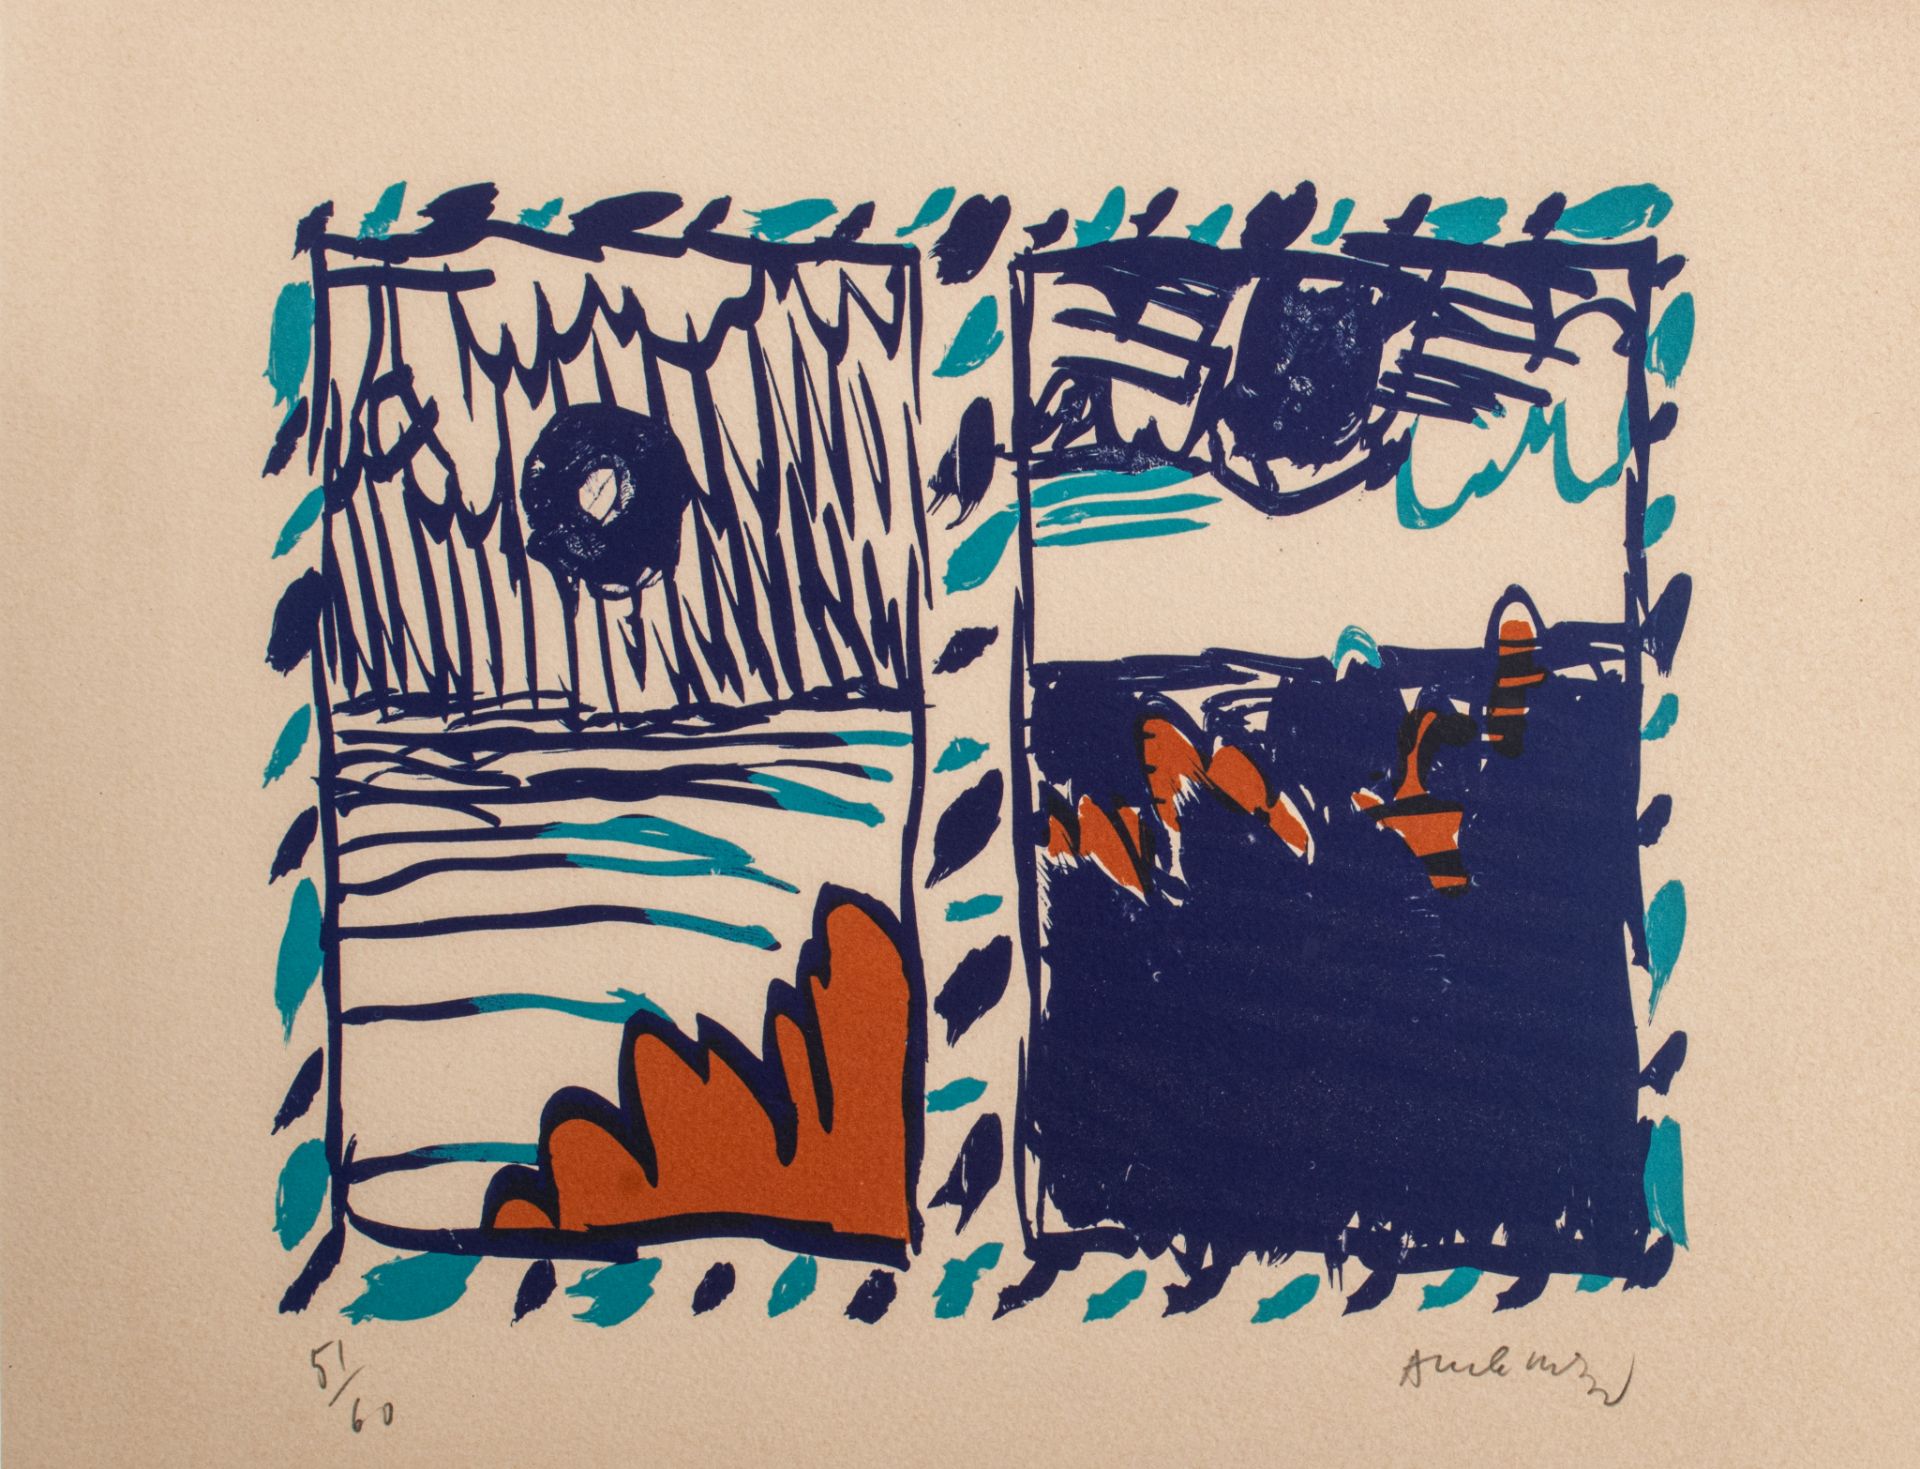 Pierre Alechinsky (1927), abstract composition, lithograph in colours, No 51/60, 24 x 30 cm